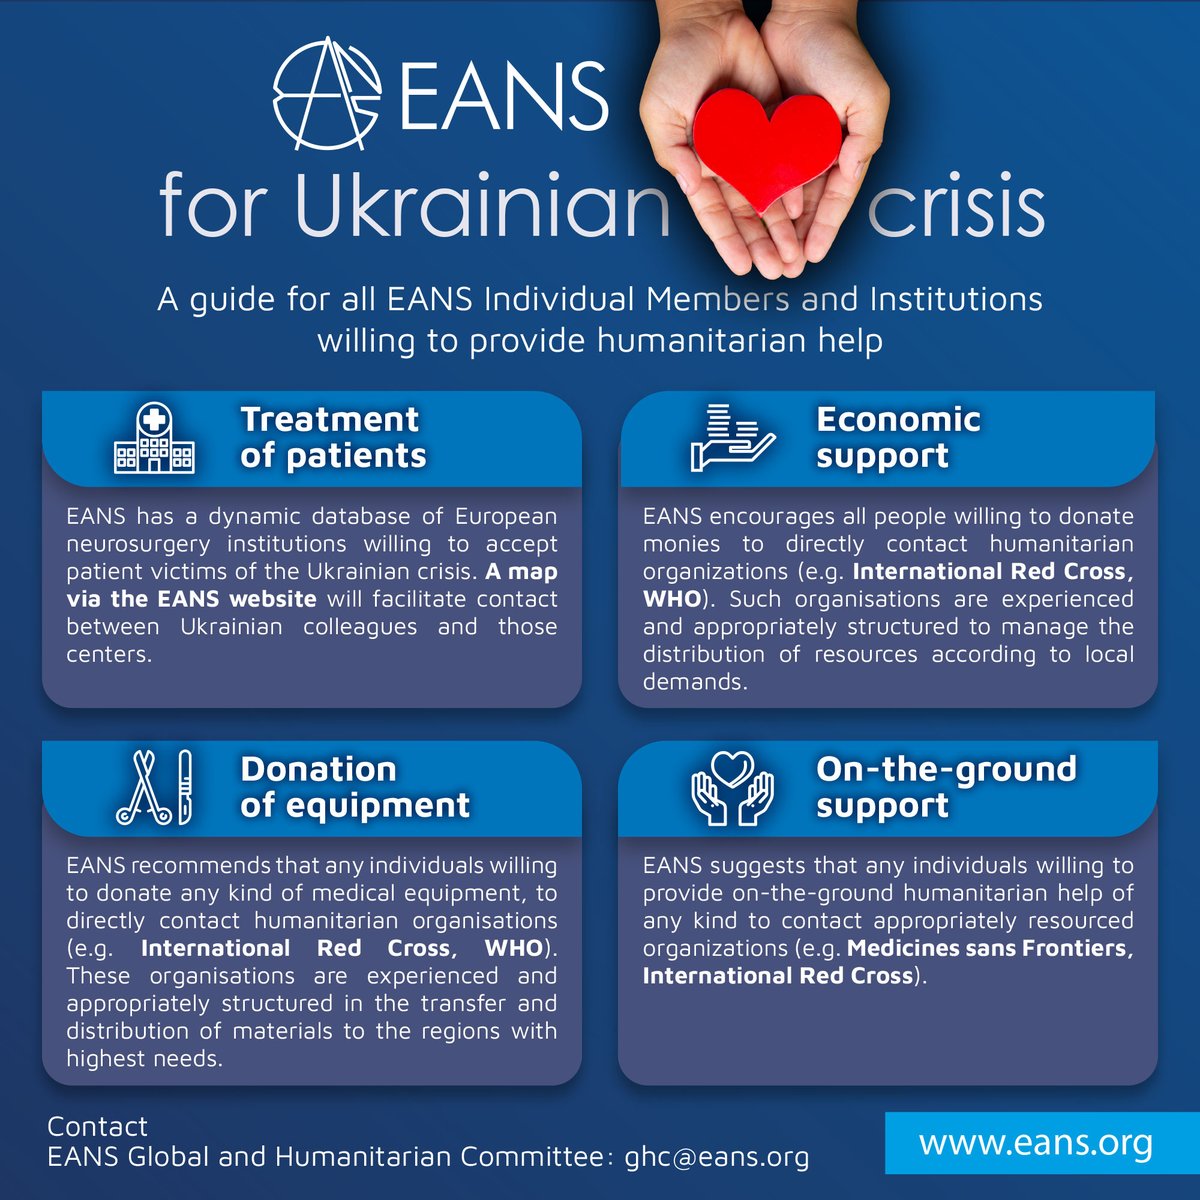 EANS for Ukrainian Crisis: Get Involved! Whether small or big, any action can make a difference and have a great impact in the long run. 
Read more how you can get involved! #Ukrainian #Crisis #guide #humanitarianhelp #neurosurgicalcenters 
> > bit.ly/3w3jvxT